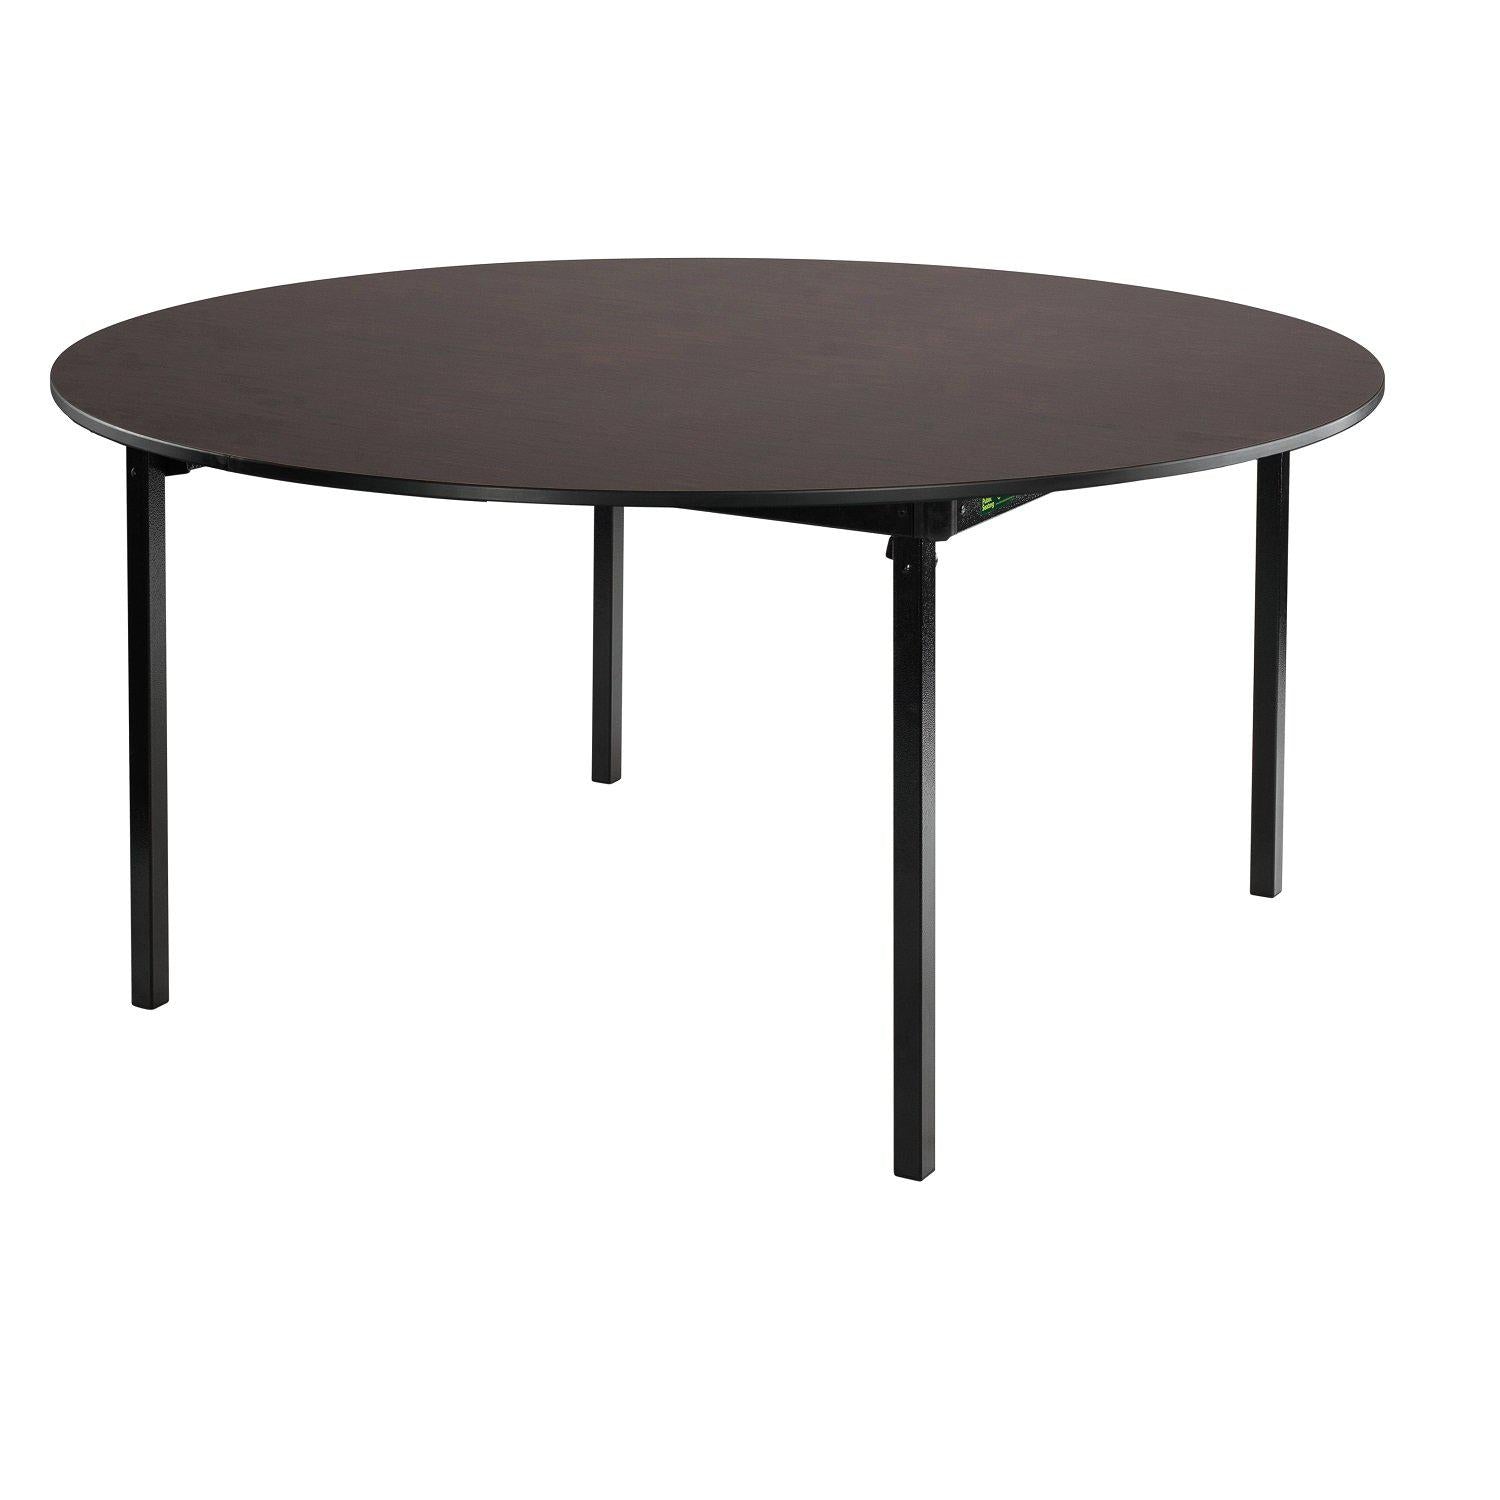 Max Seating Folding Table, 72" Round, Particleboard Core, High Pressure Laminate Top with T-Mold Edging